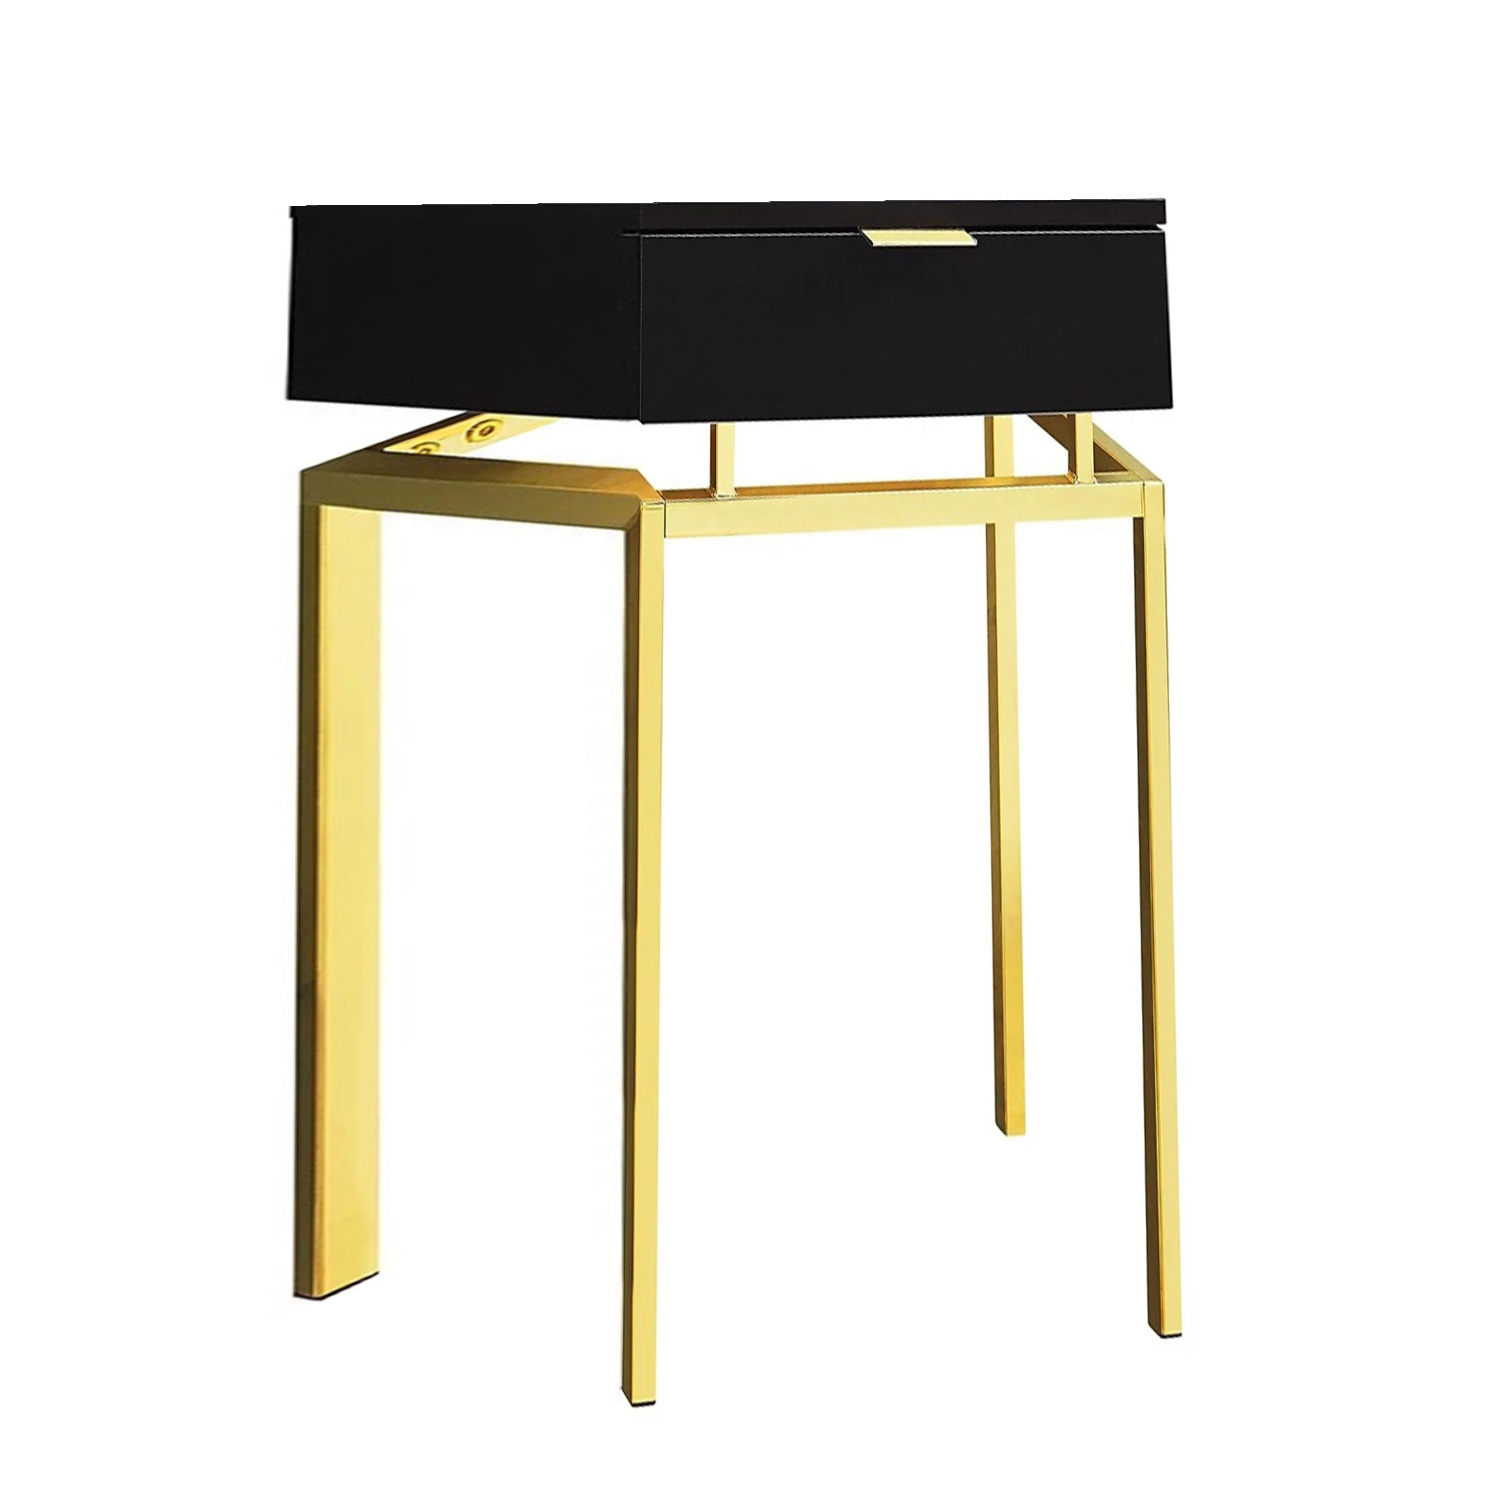 12.75" x 18.25" x 23" Cappuccino Finish and Gold Metal Accent Table